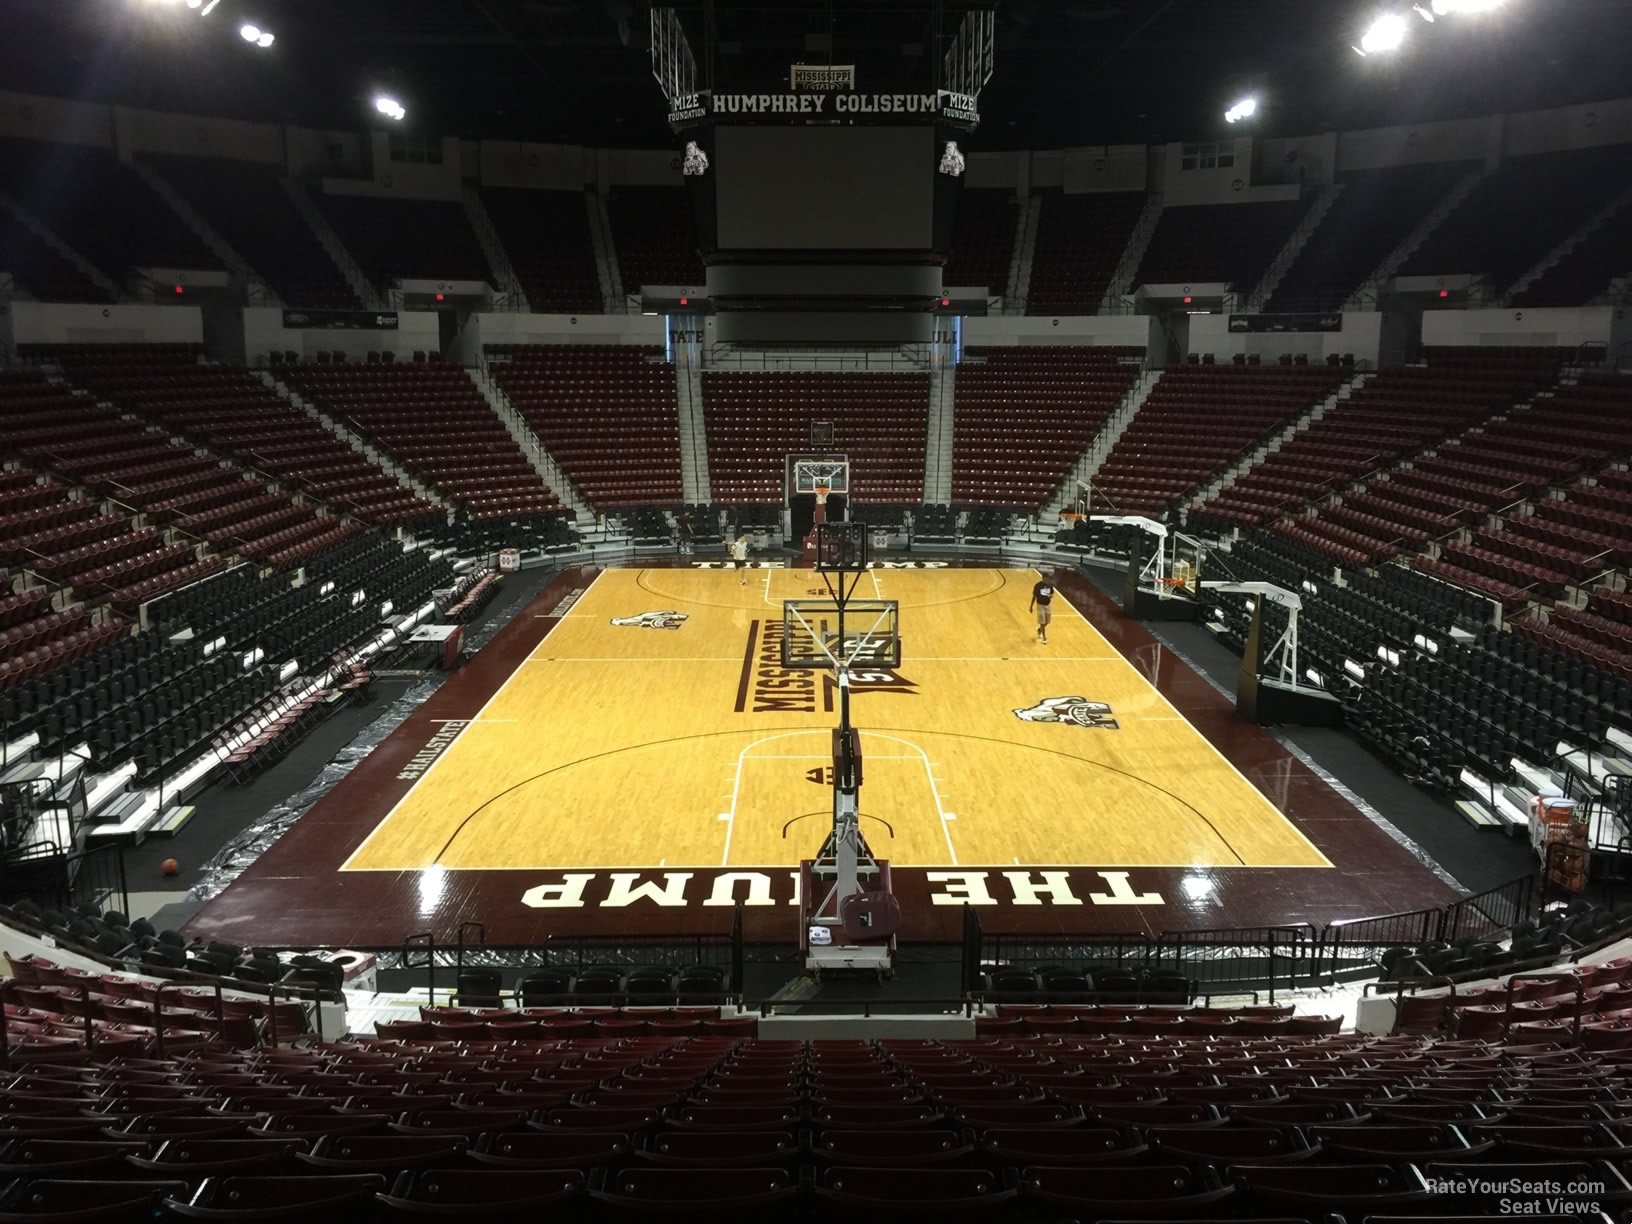 section 111, row 15 seat view  - humphrey coliseum